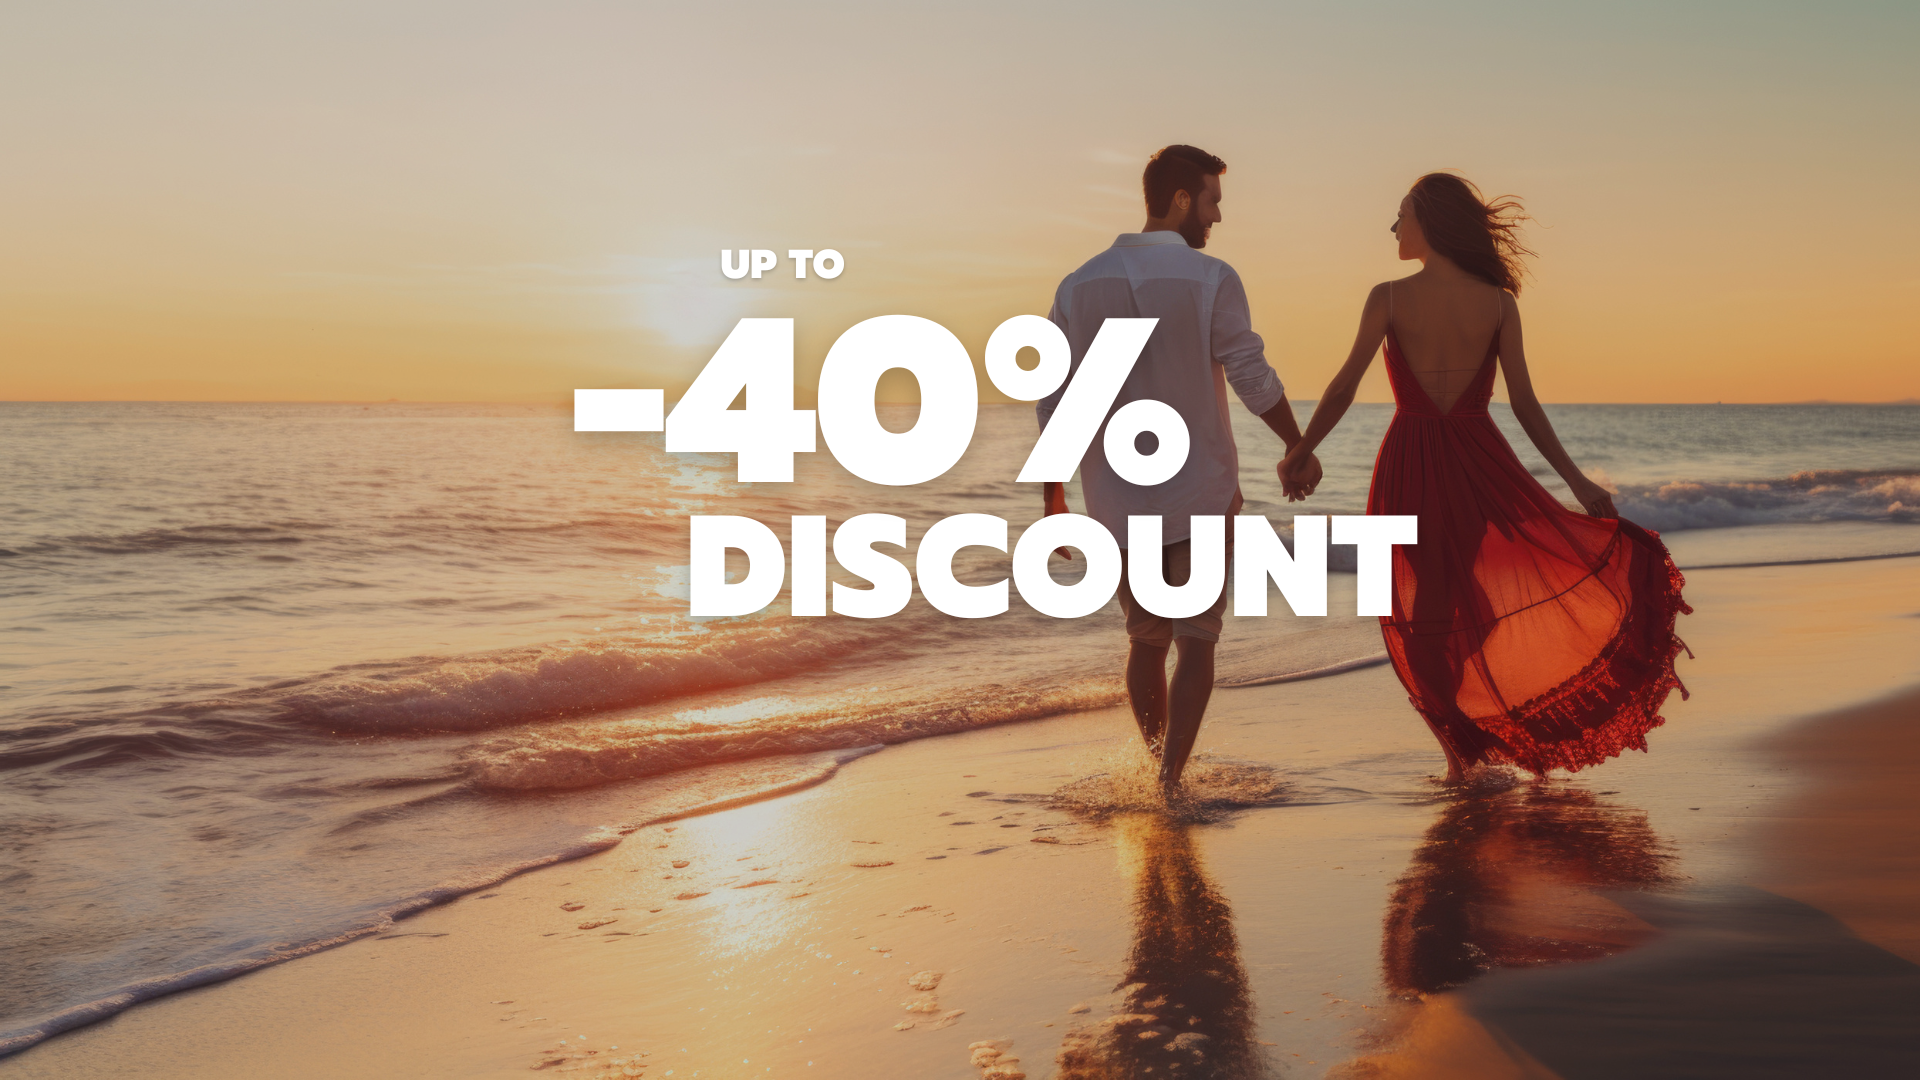 Up to 40% discount for Valentine’s Day